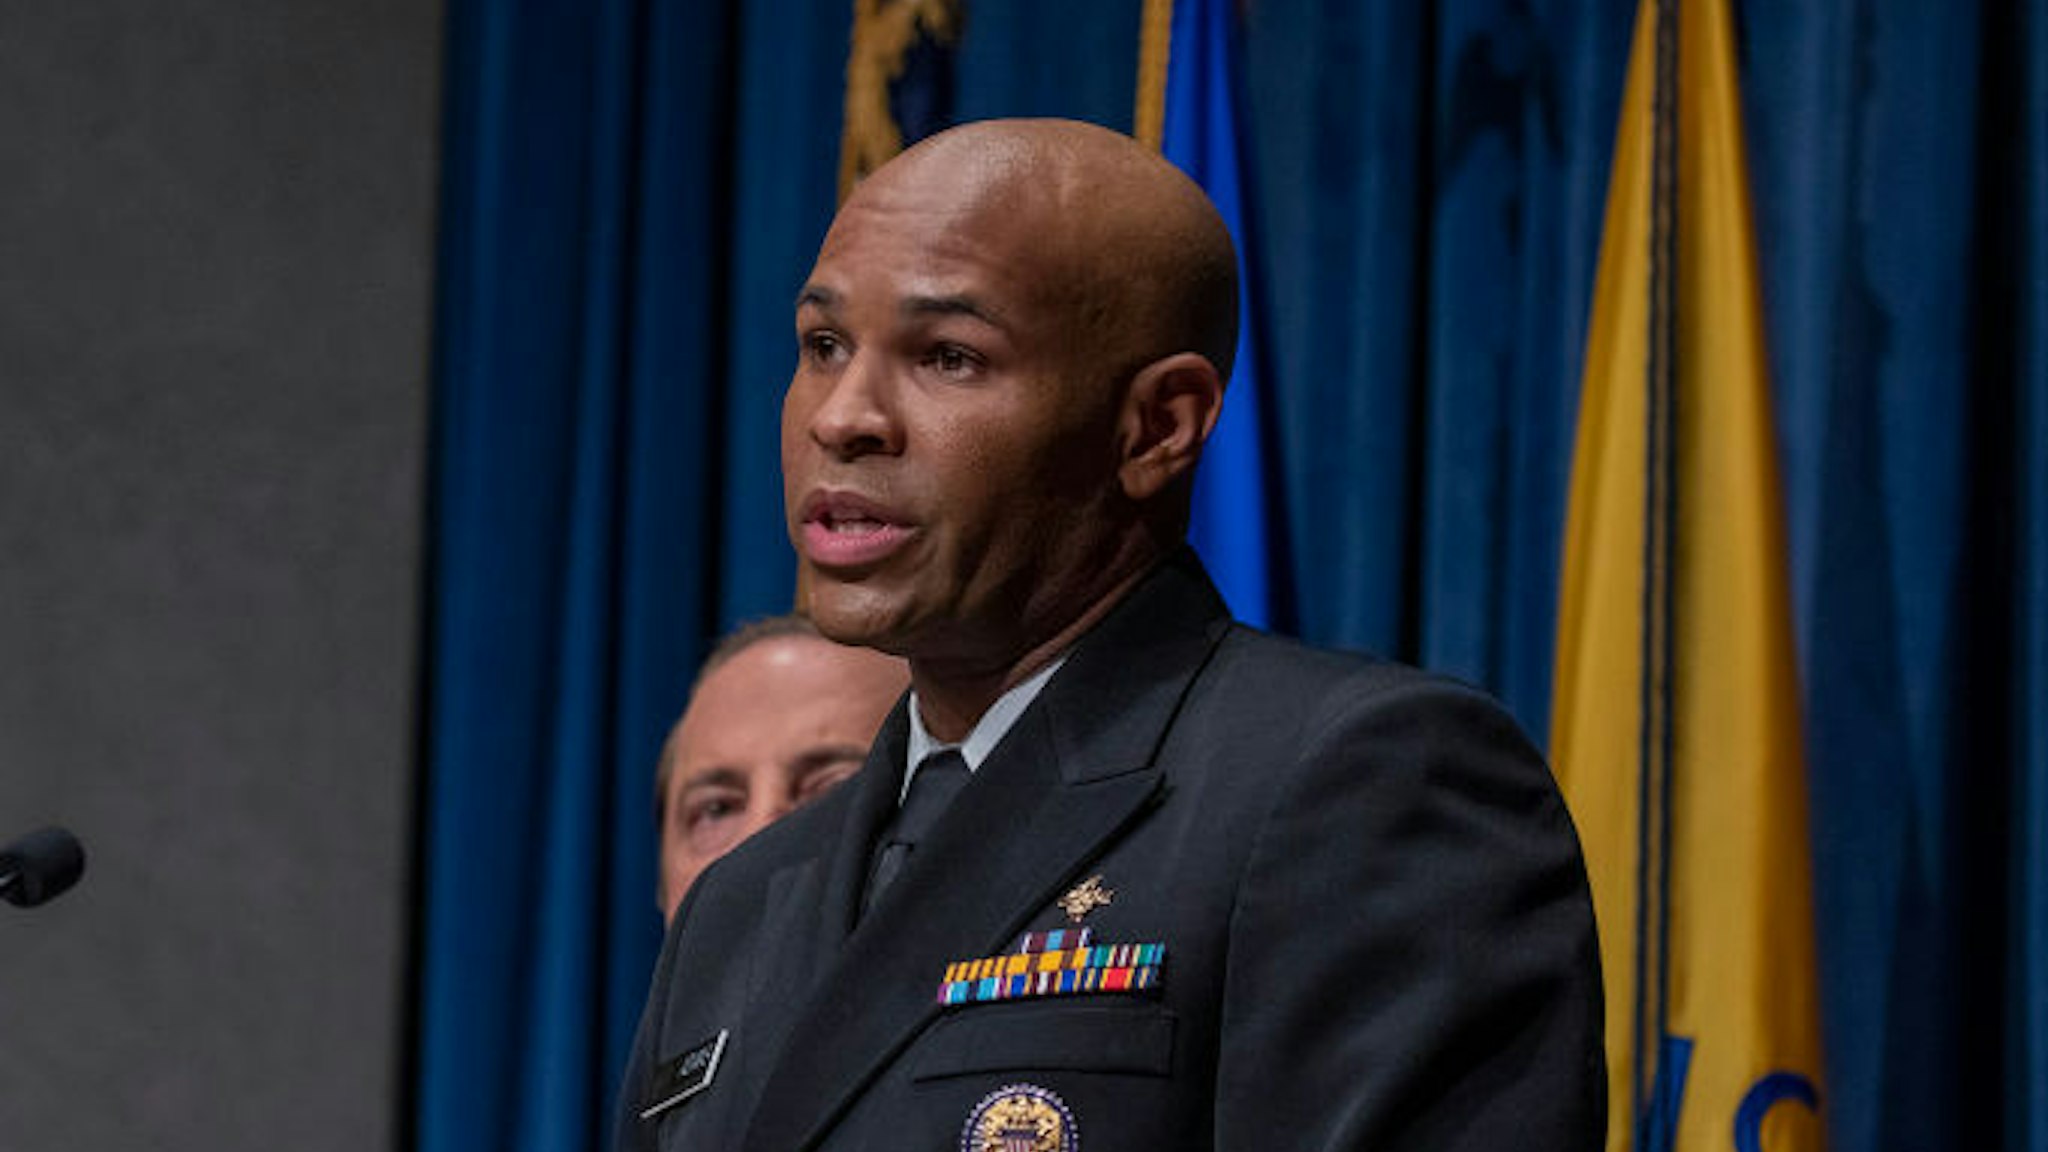 WASHINGTON, DC - AUGUST 29: Surgeon General Jerome Adams speaks at press conference on August 29, 2019 in Washington, DC. Surgeon General issued an advisory Thursday warning against marijuana use by pregnant women and youths.